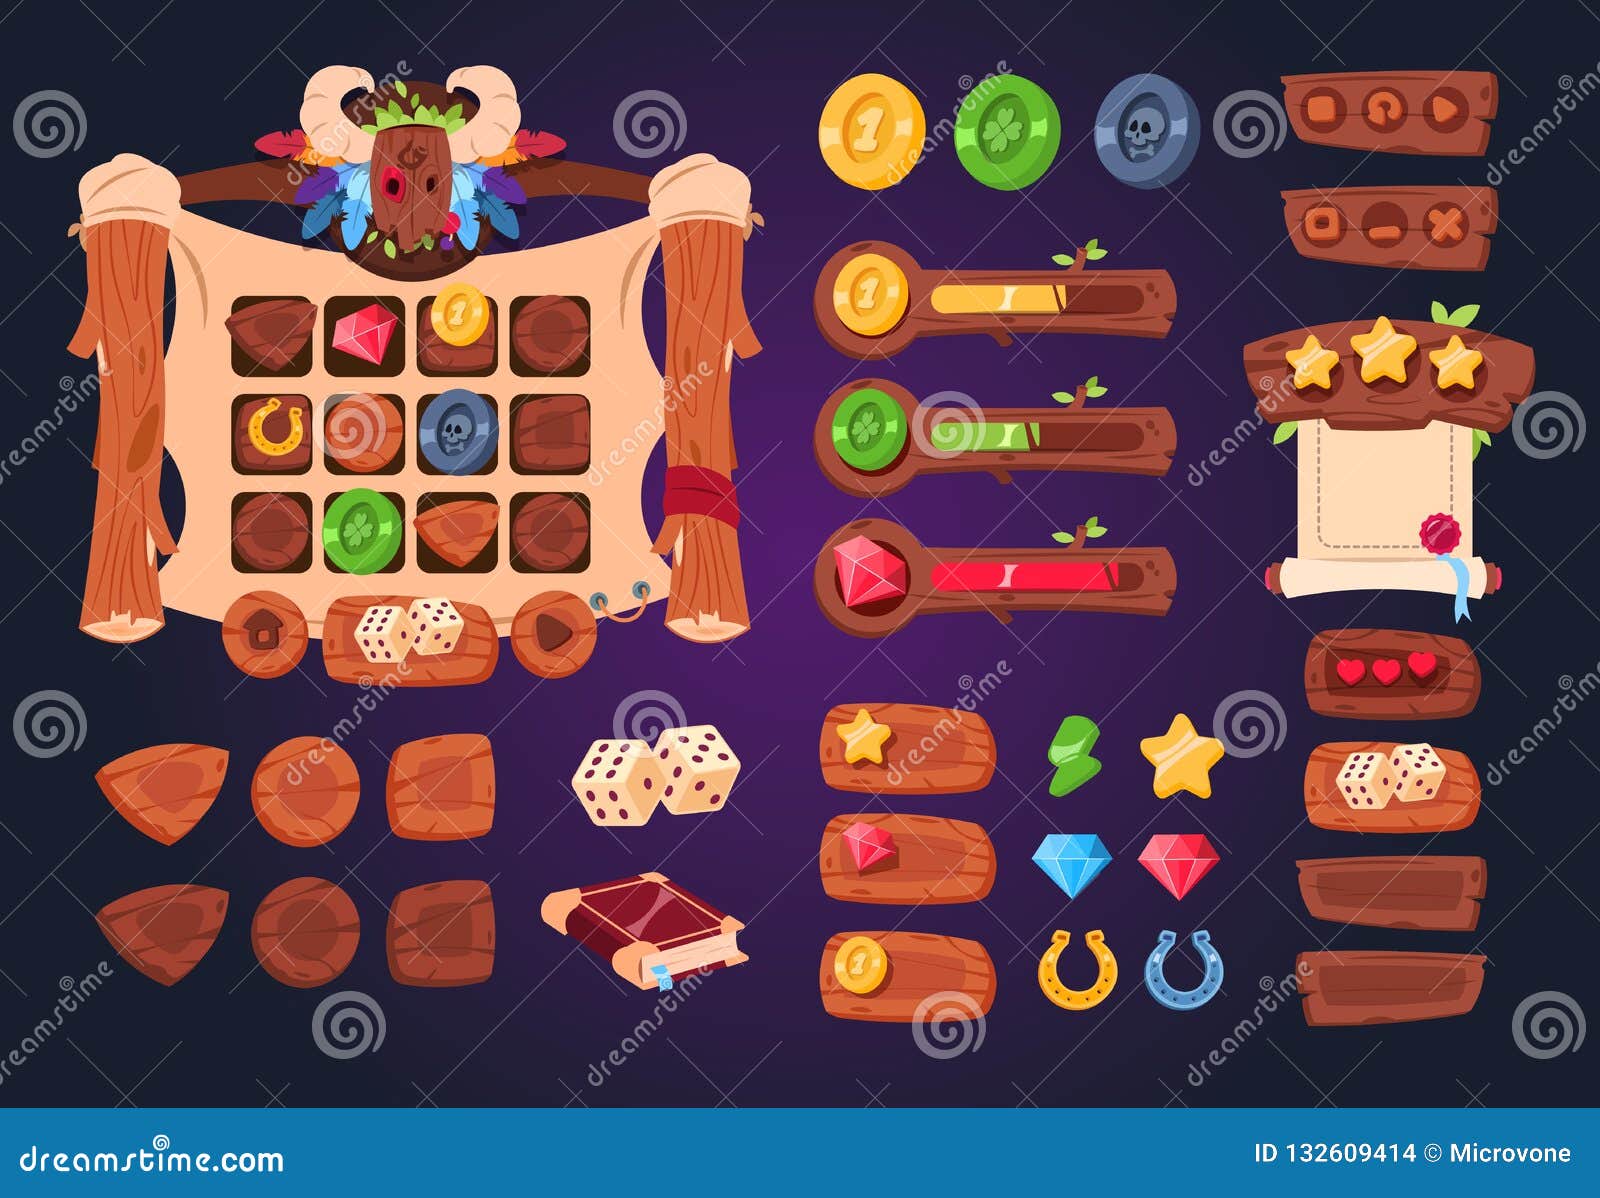 Popup Clipart Transparent Background, Wooden Popup Game Design, Board,  Wood, Tag PNG Image For Free Download